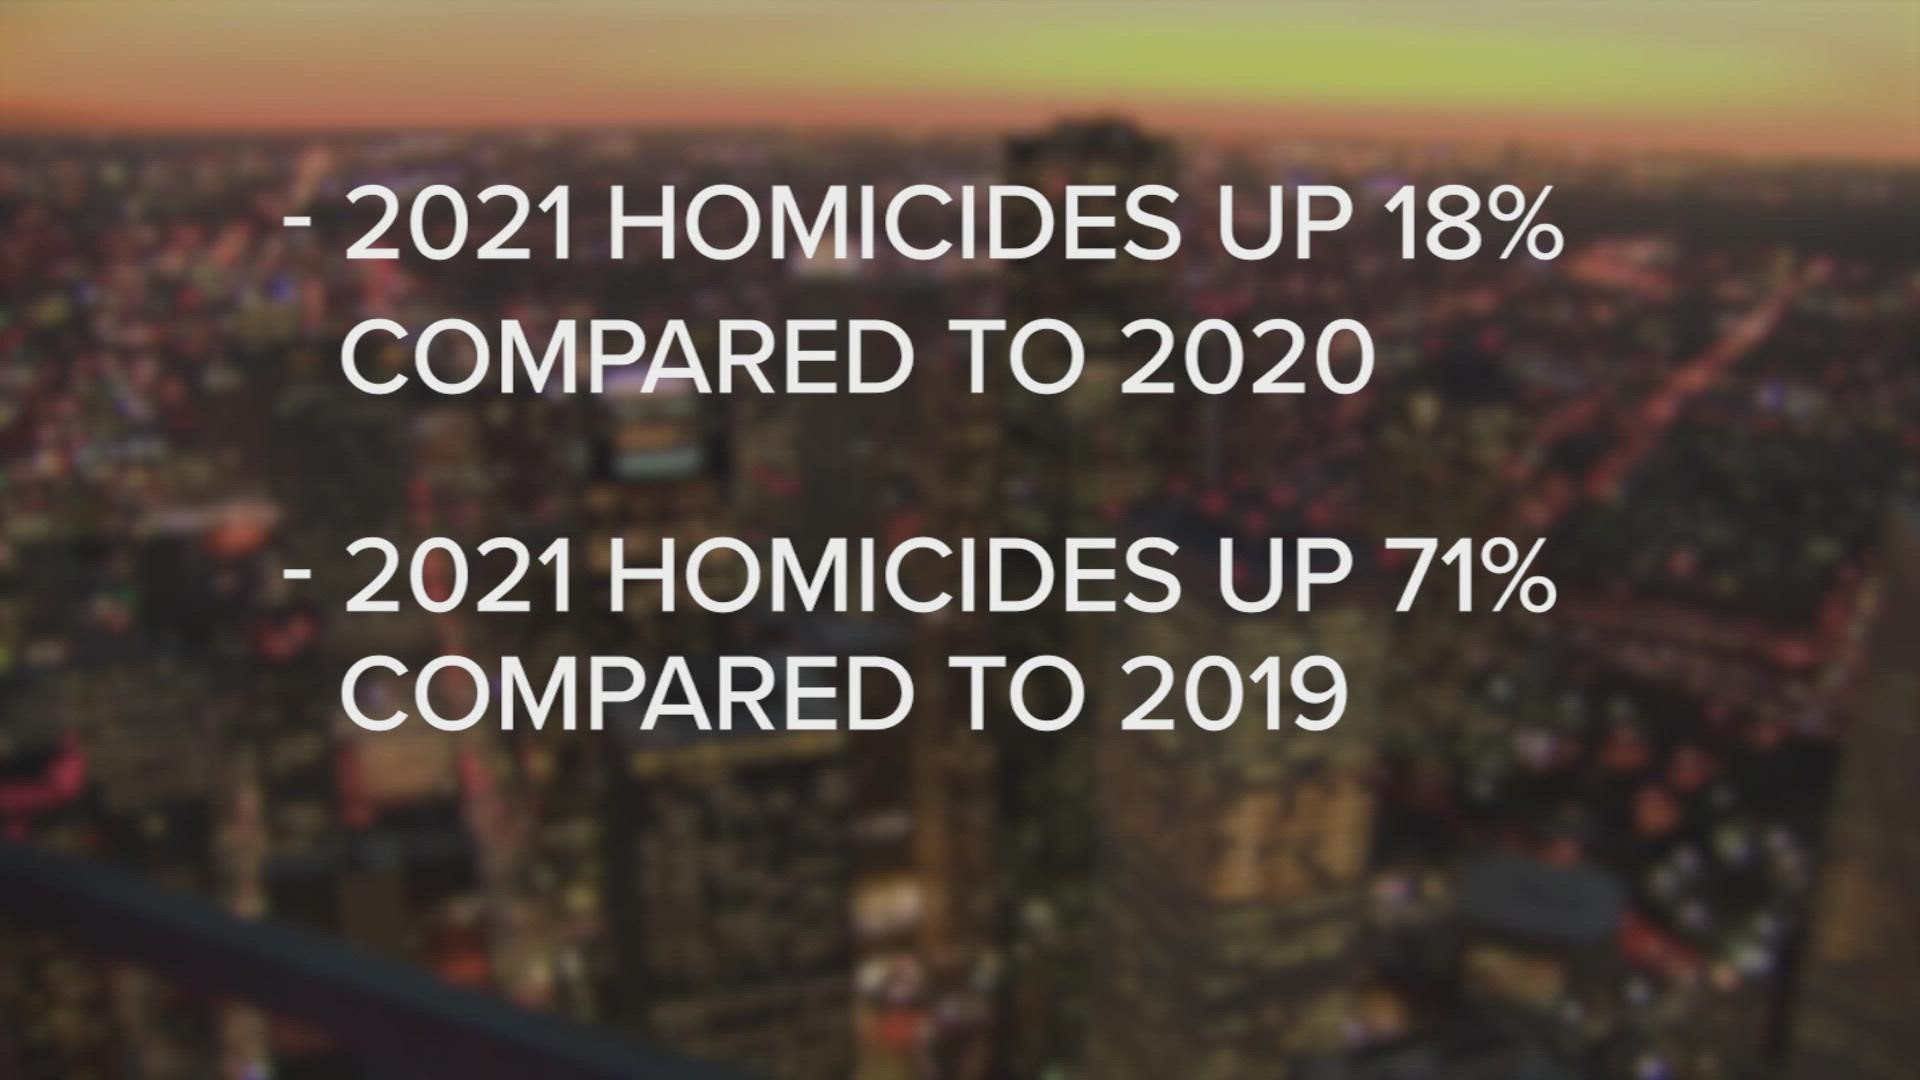 Homicides were up 71% in 2021 compared to 2019.